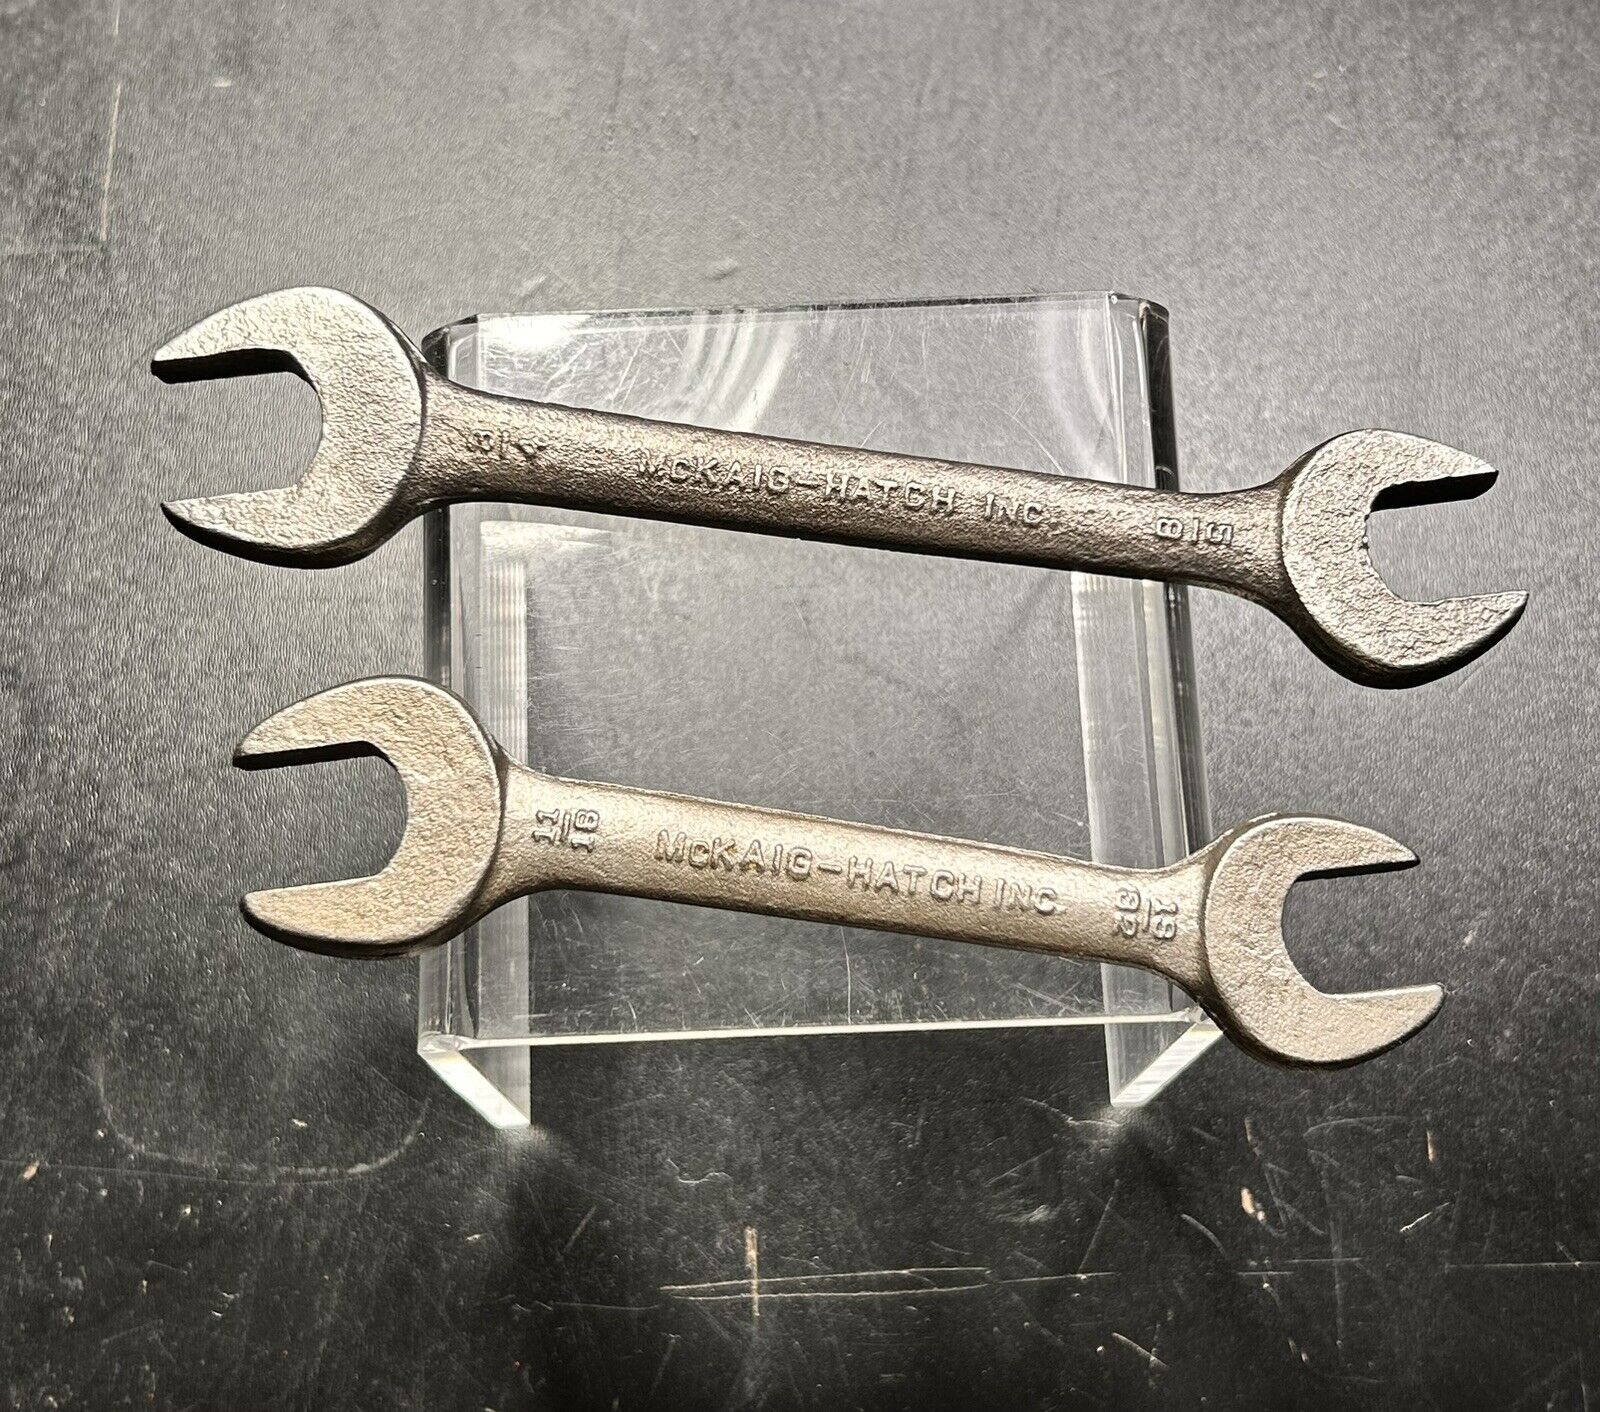 Vintage Mckaig-Hatch Wrenches Open End